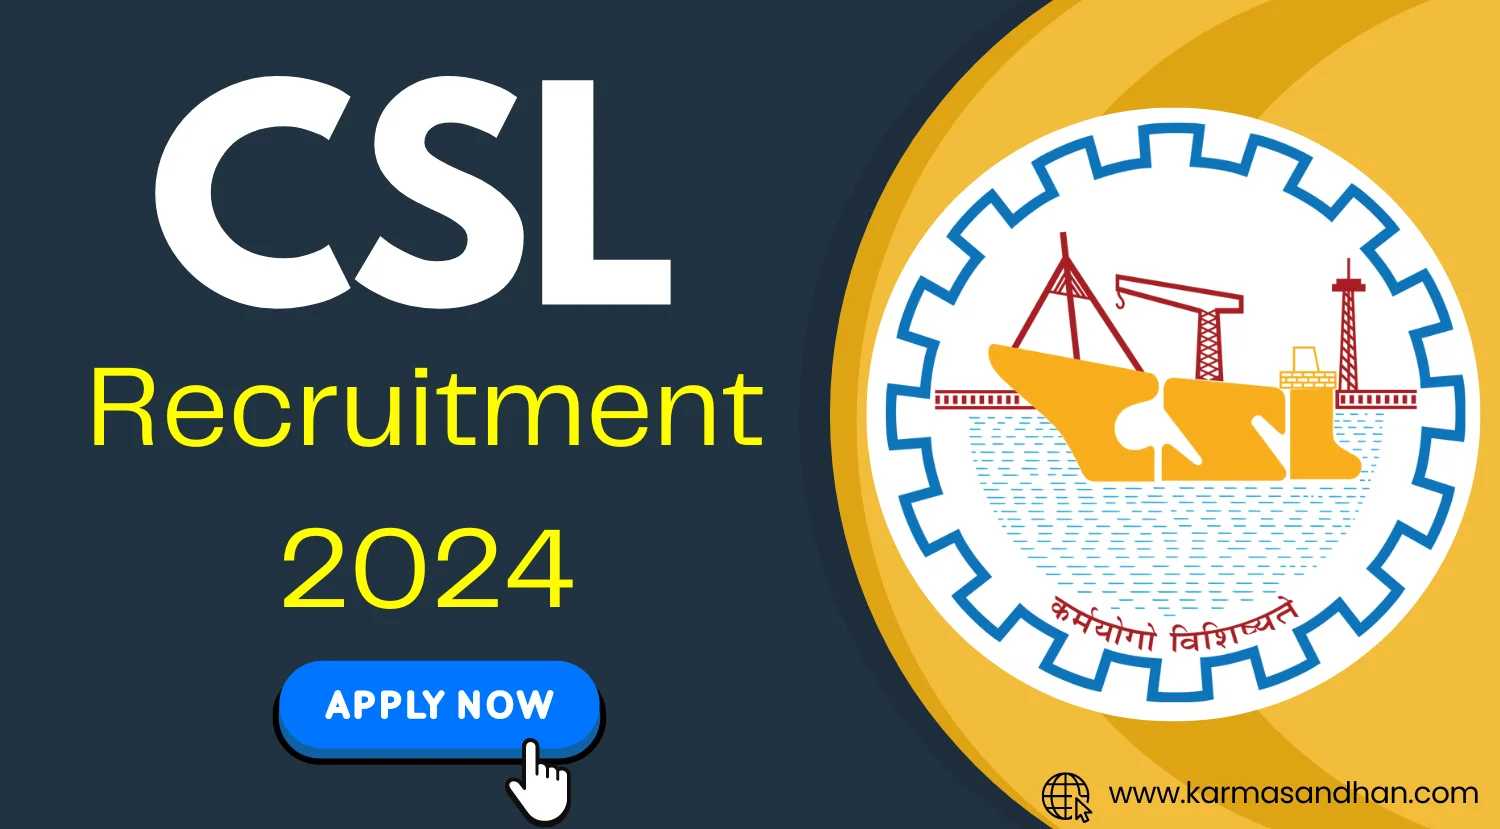 CSL Safety Assistant Recruitment 2024